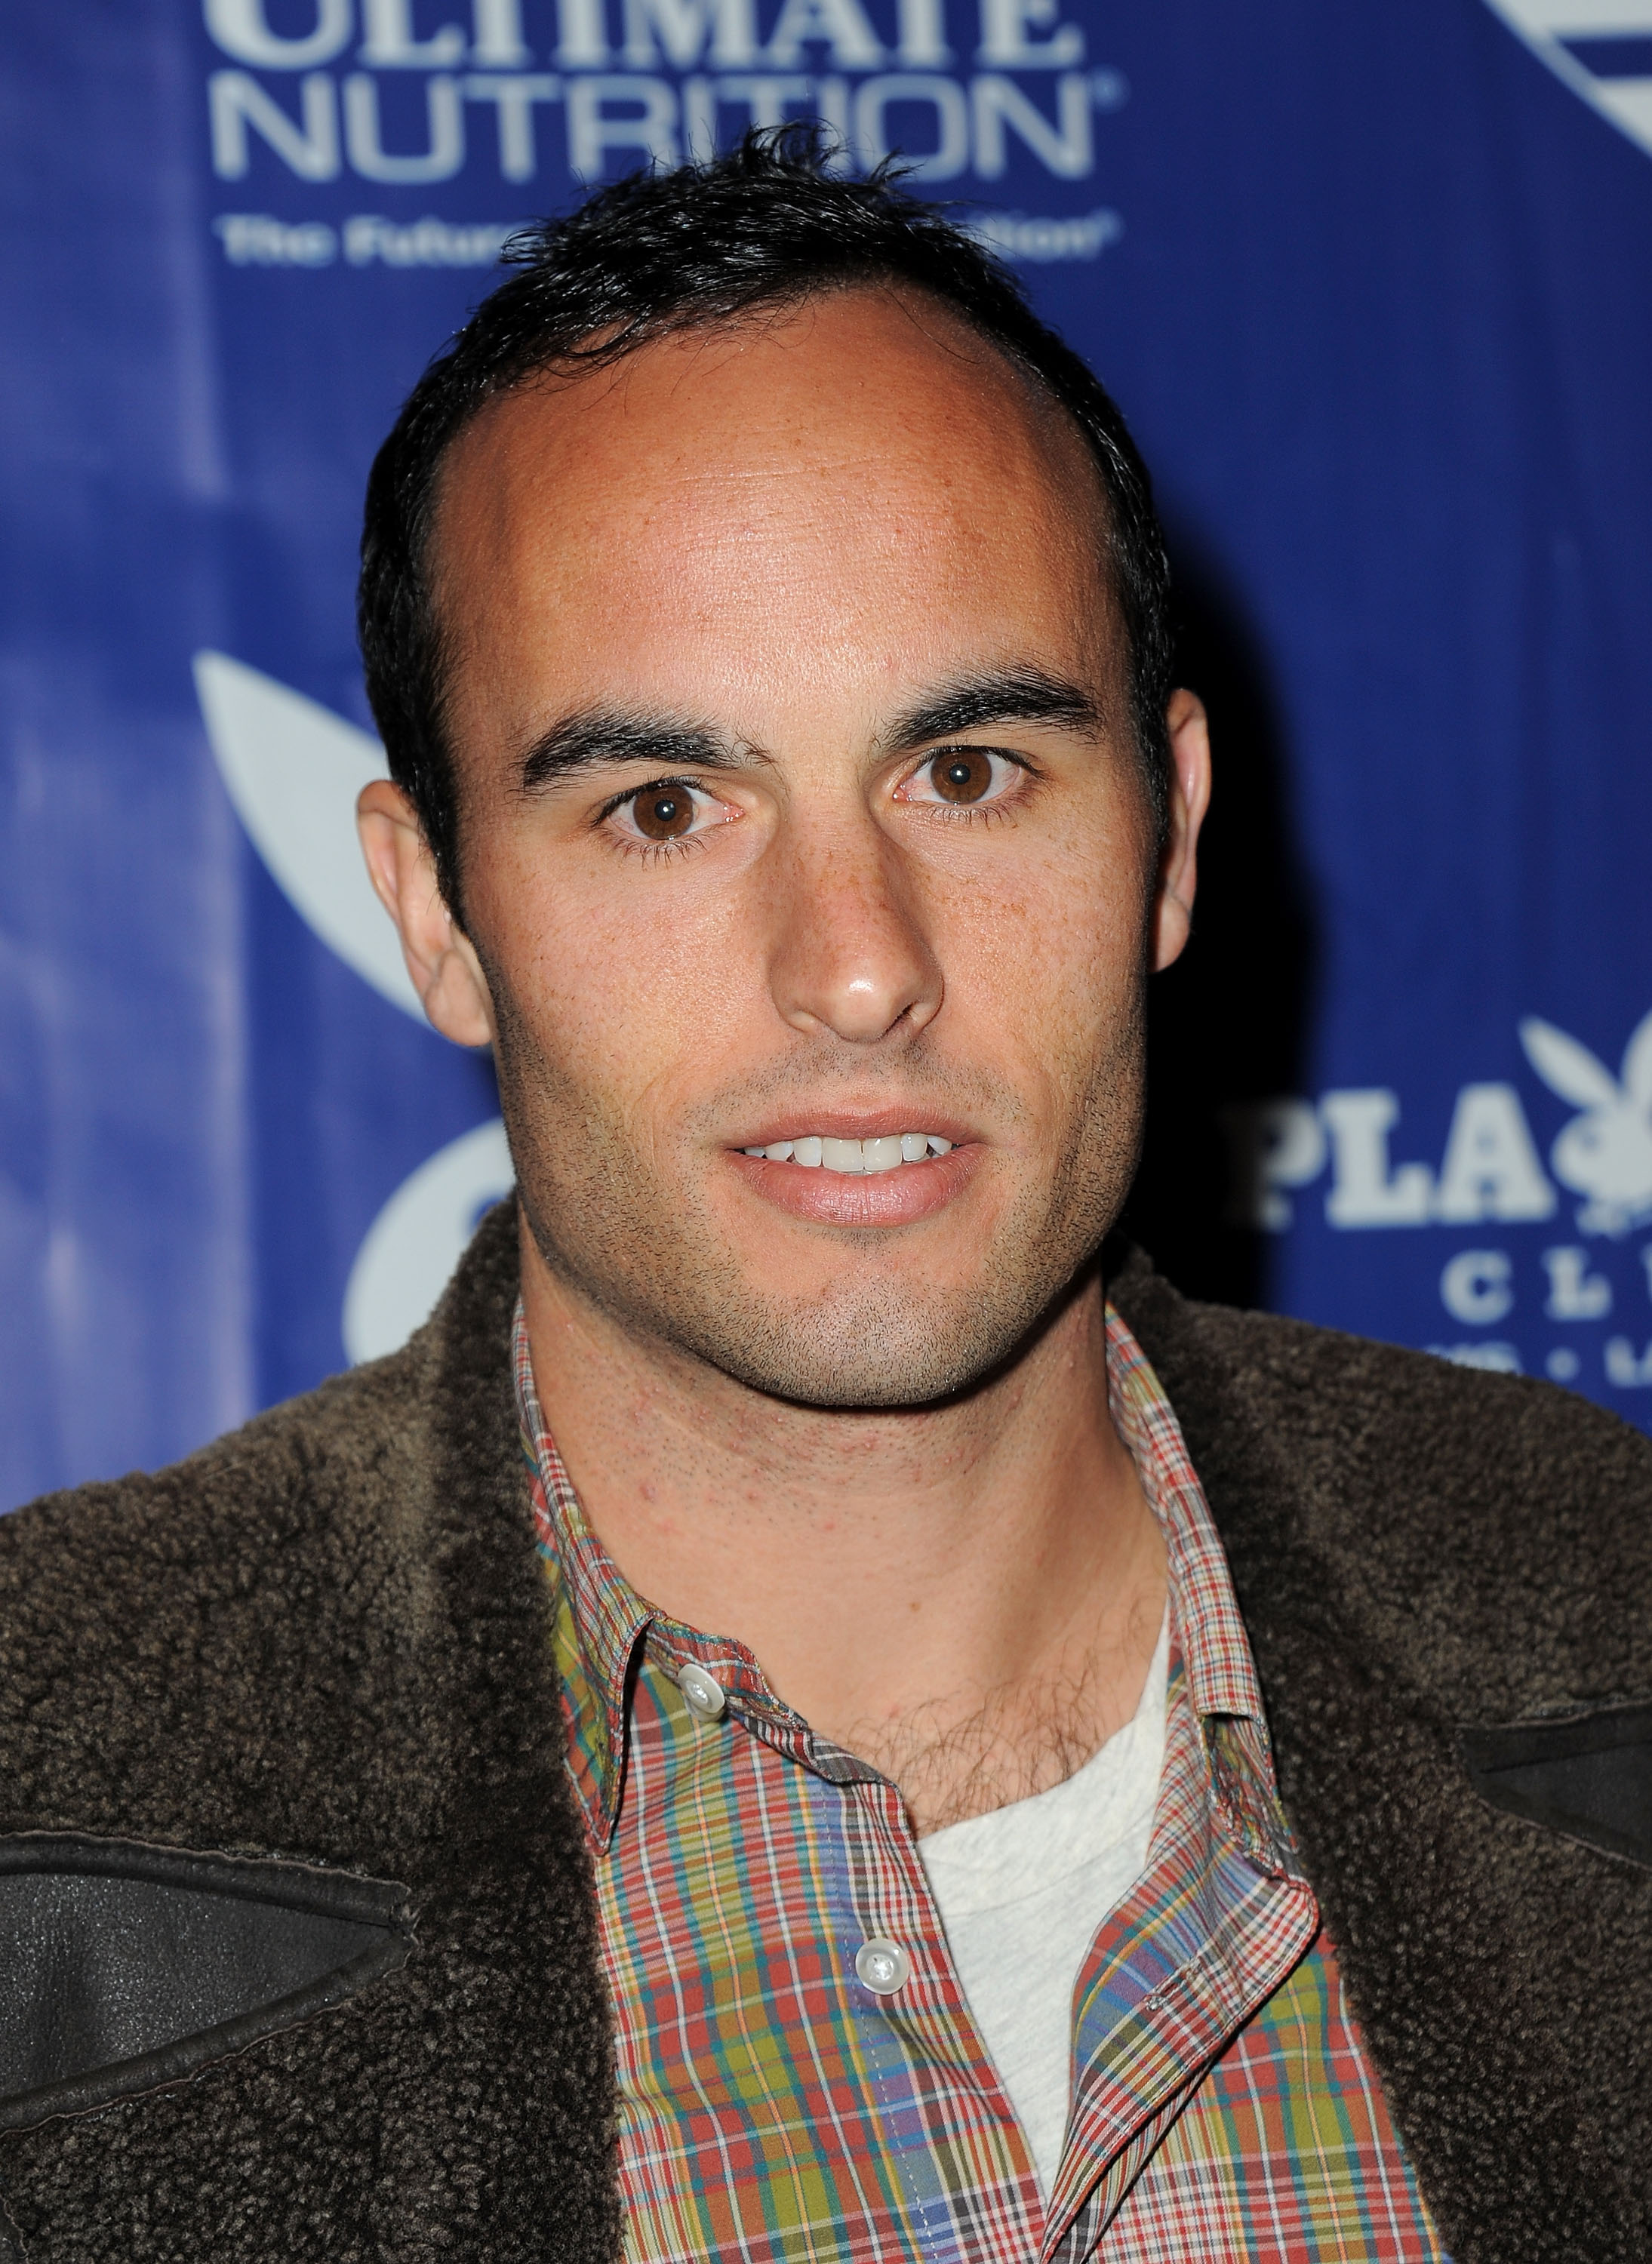 DALLAS, TX - FEBRUARY 04:  American soccer player Landon Donovan attends the Bud Light Hotel Playboy Party with performances by Snoop Dogg, Warren G and Flo Rida on February 4, 2011 in Dallas, Texas.  (Photo by Jordan Strauss/Getty Images for Bud Light)